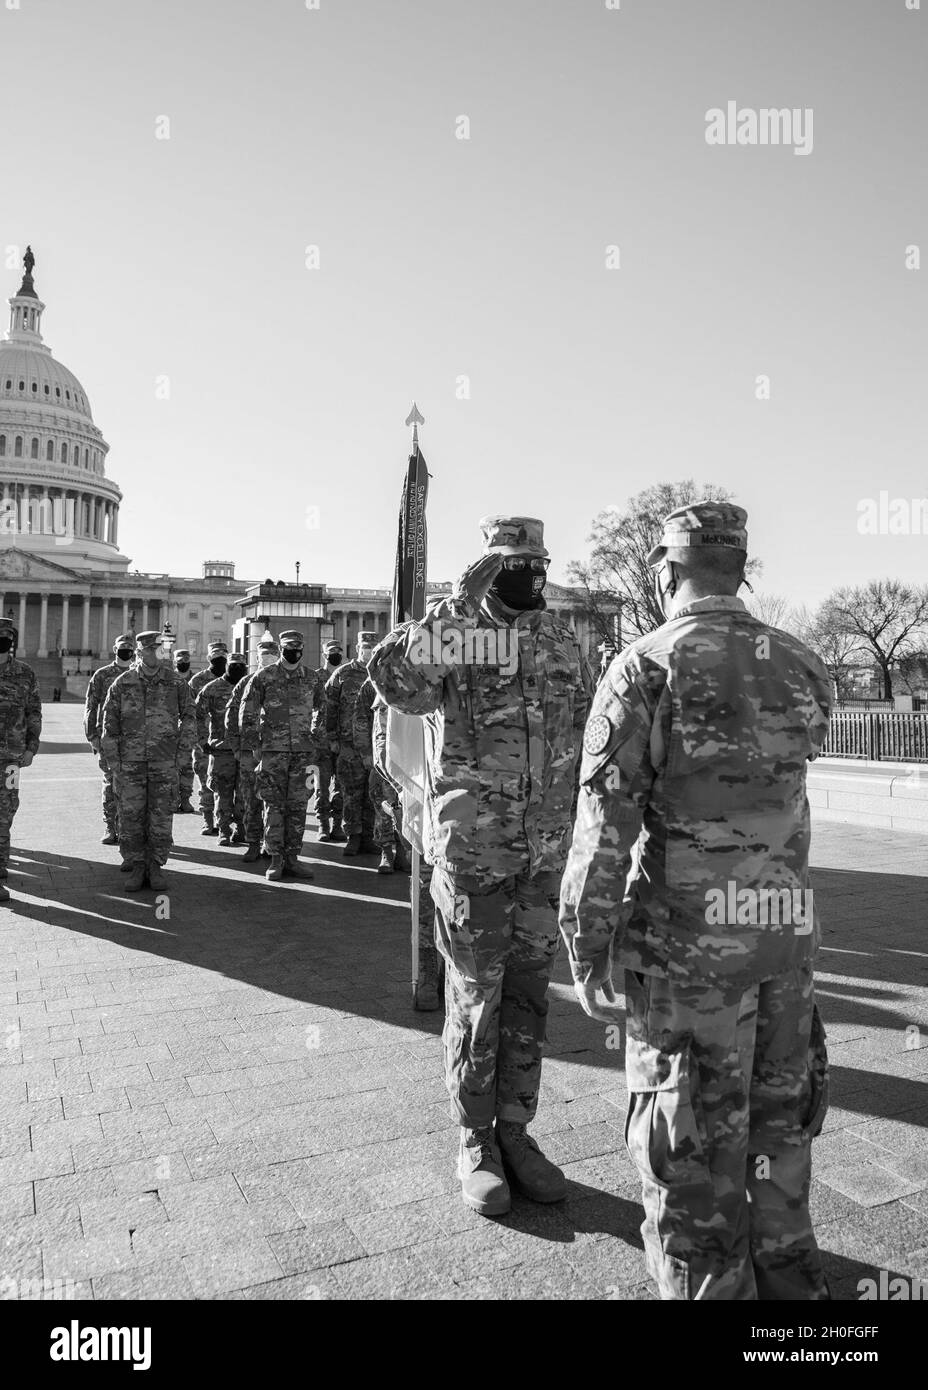 U.S. Army Command Sgt. Maj. William Russell III, senior enlisted advisor to the adjutant general, Michigan National Guard, salutes Col. Chirs McKinney, commander of the 177th Military Police Brigade, at the U.S. Capitol in Washington, D.C., Feb. 25, 2021. The National Guard has been requested to continue supporting federal law enforcement agencies with security, communications, medical evacuation, logistics, and safety support to state, district and federal agencies through mid-March. Stock Photo